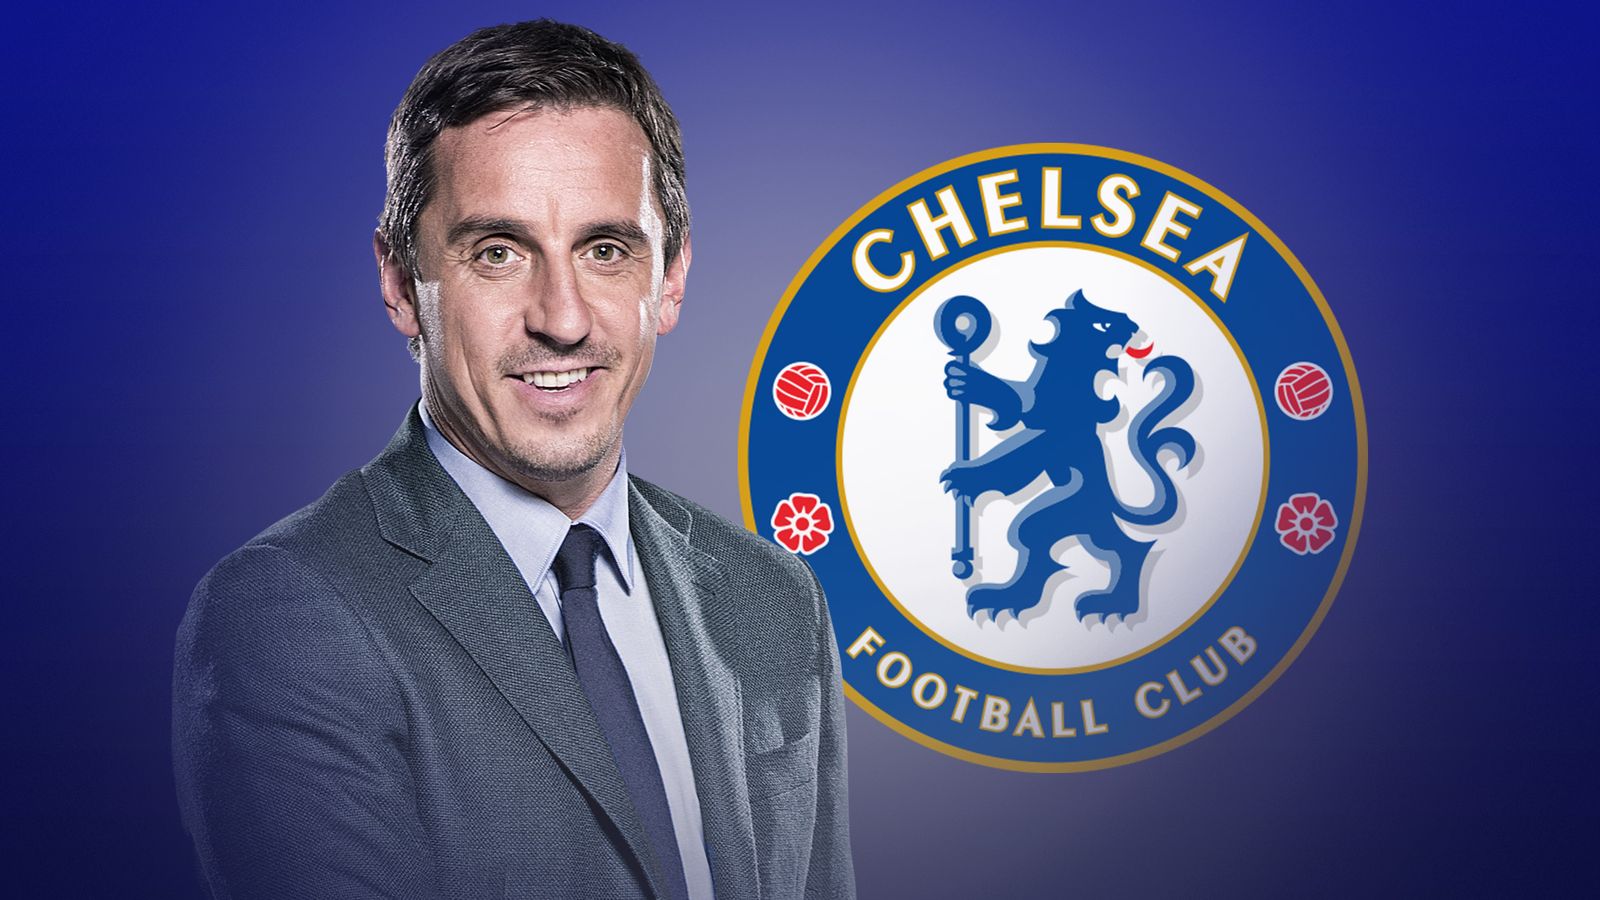 Gary Neville talks about Chelsea's current situation